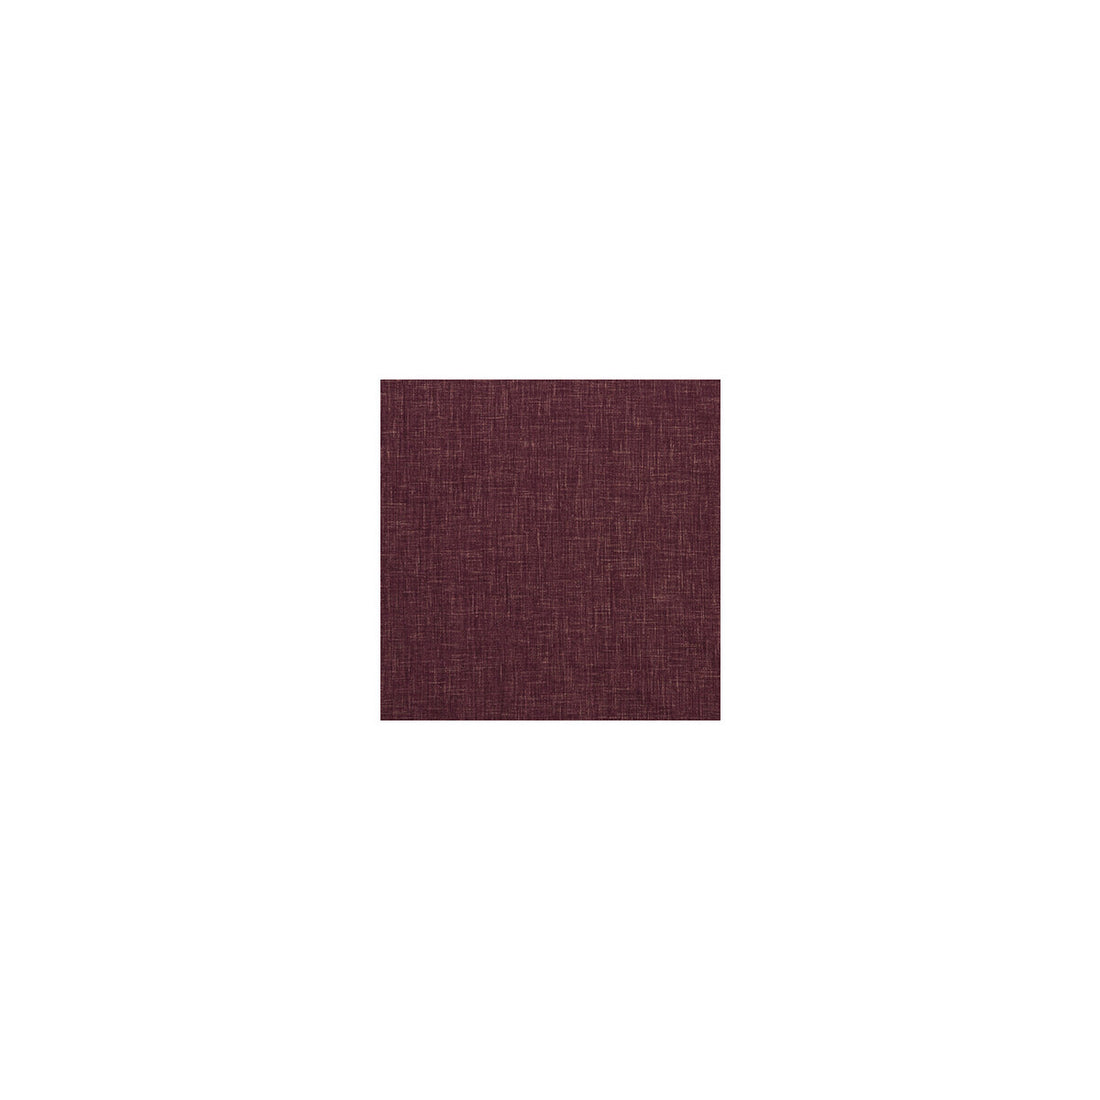 Albany fabric in damson color - pattern F1098/06.CAC.0 - by Clarke And Clarke in the Clarke &amp; Clarke Albany &amp; Moray collection